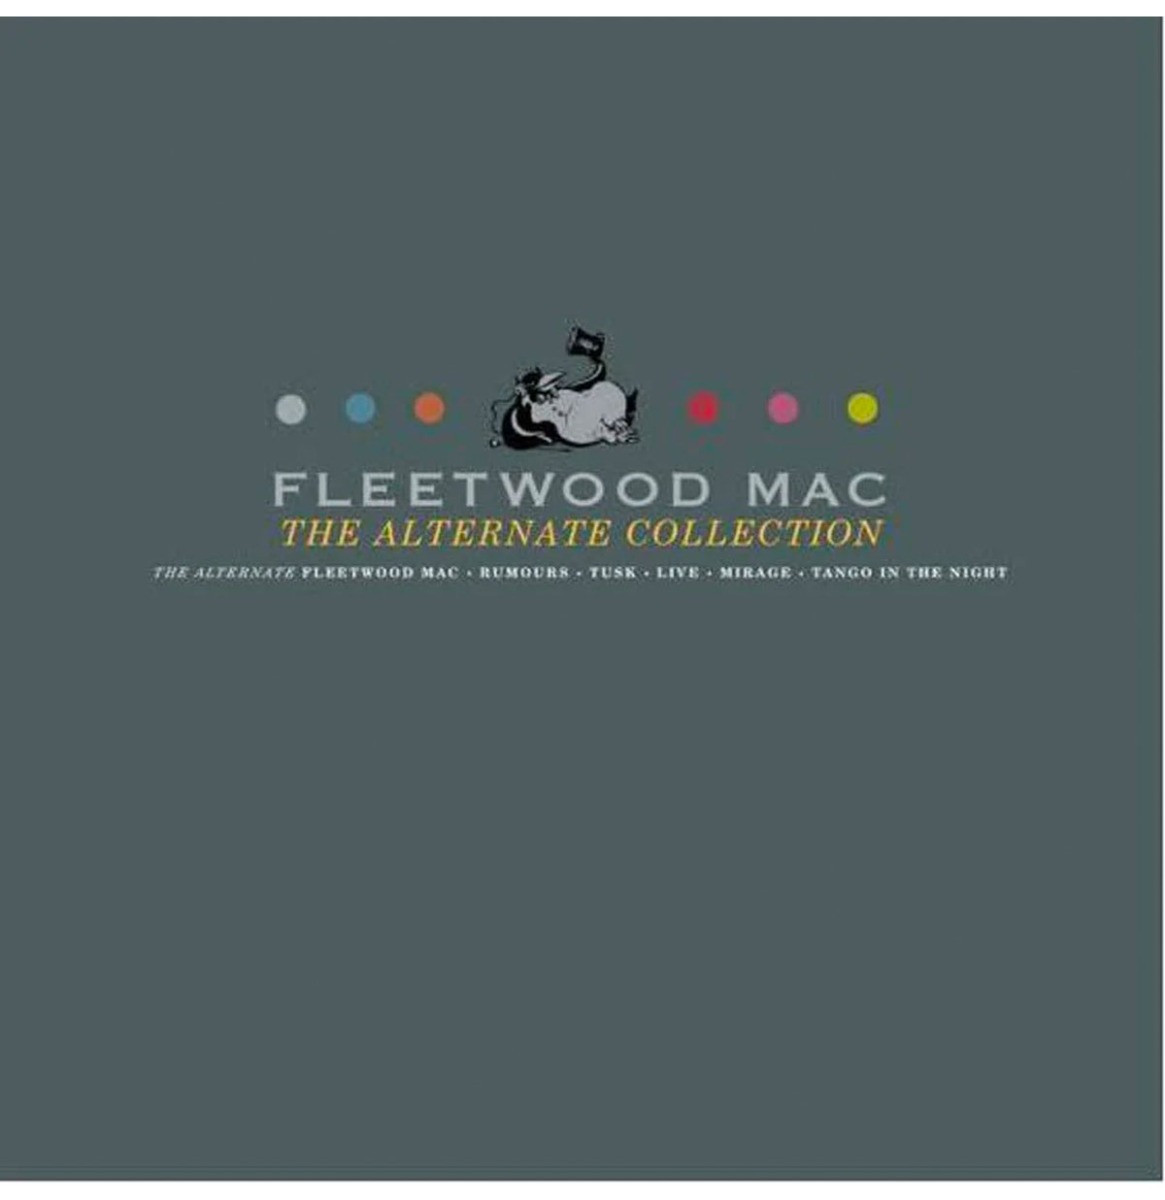 Fleetwood Mac - The Alternate Collection (Record Store Day Black Friday 2022) 6CD (Boxset)